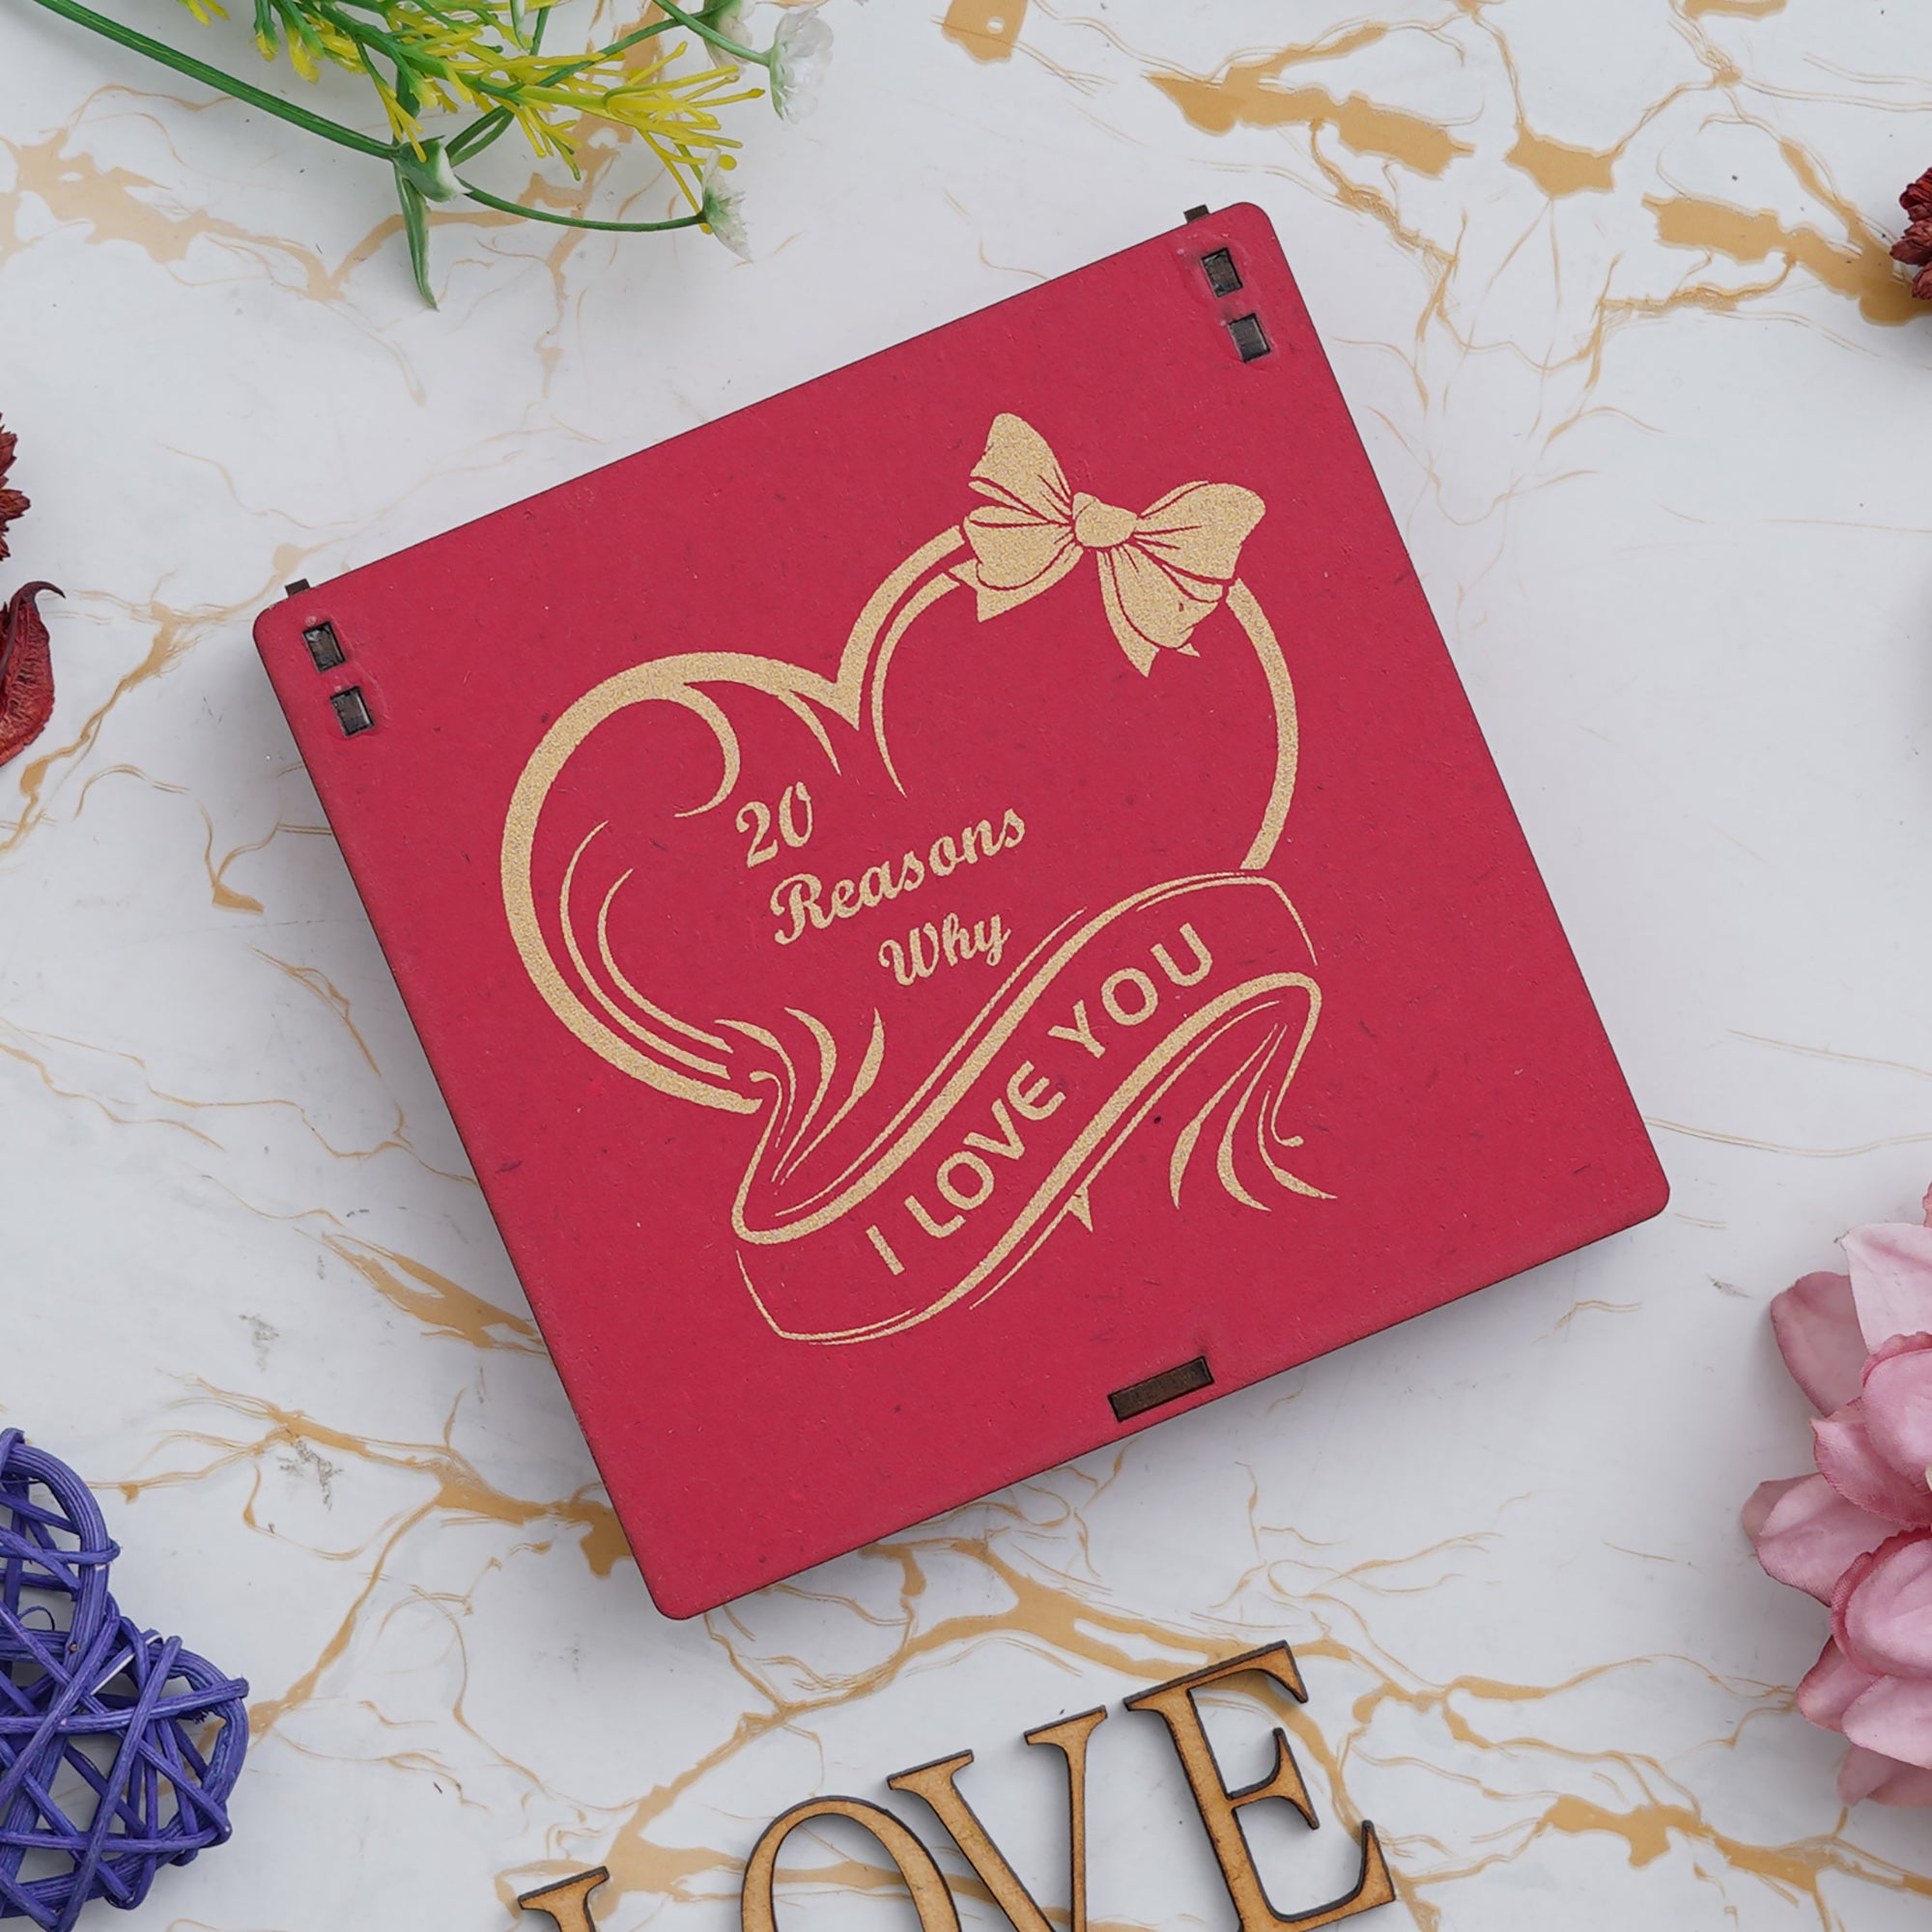 "20 Reasons Why I Love You" Printed on Little Red Hearts Decorative Valentine Wooden Gift Set Box 5